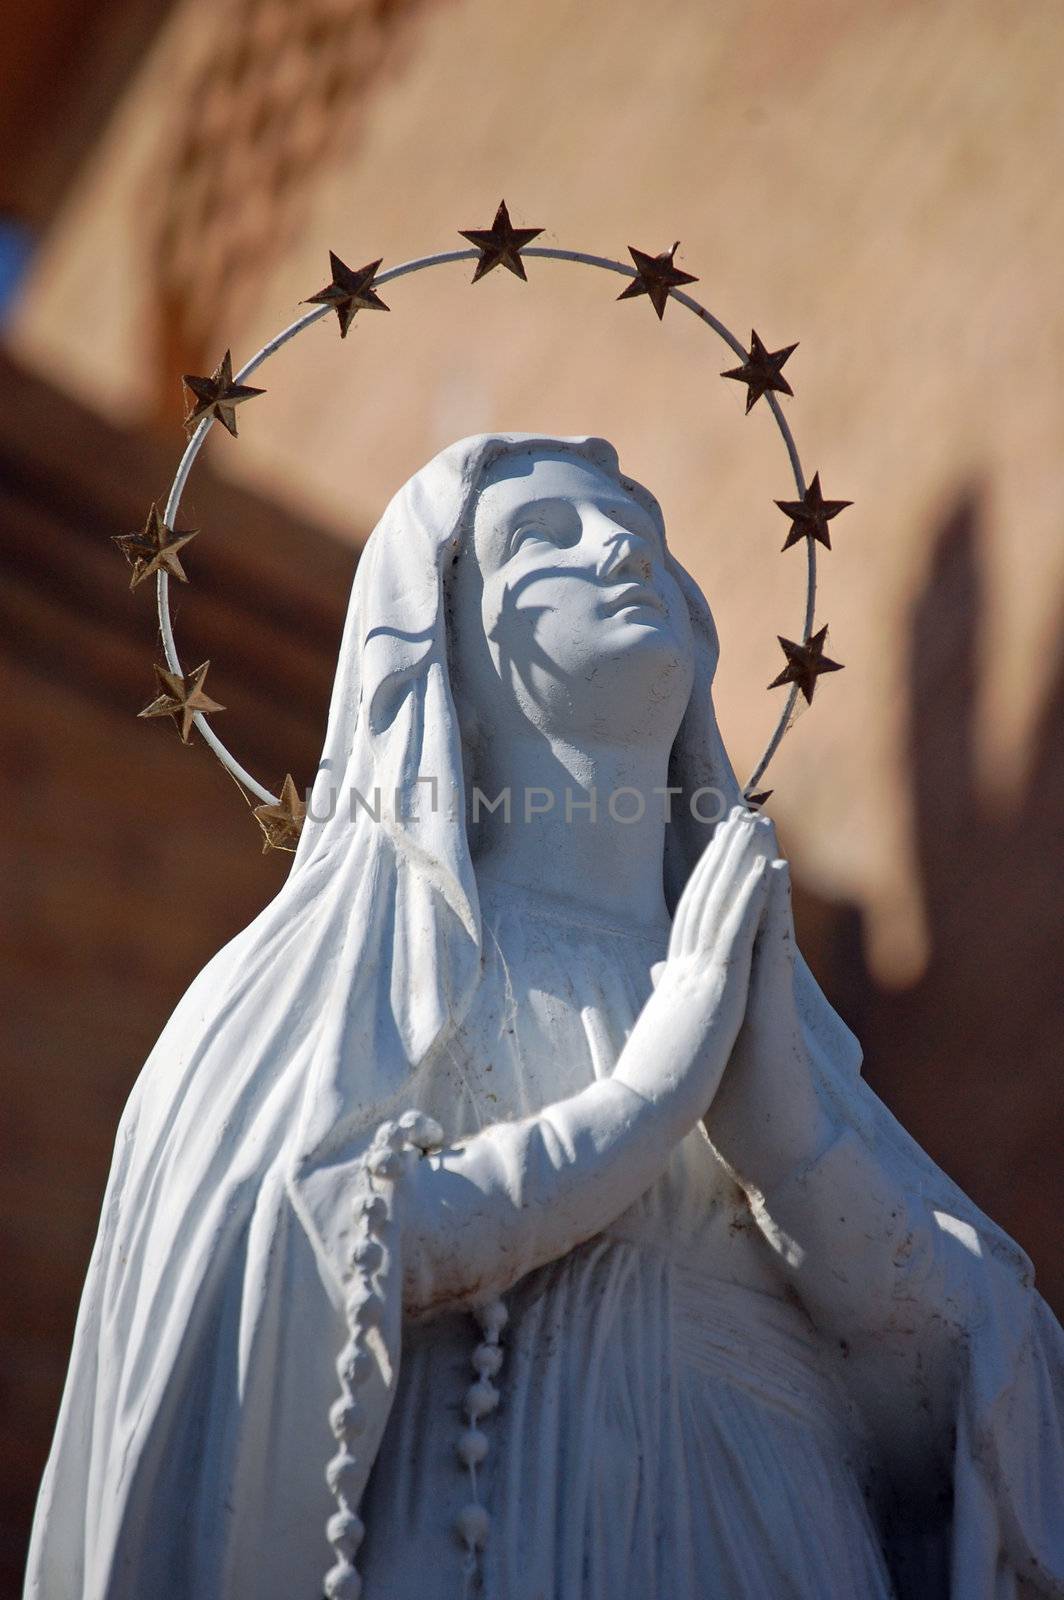 Statue of Mary Prays to God by RefocusPhoto